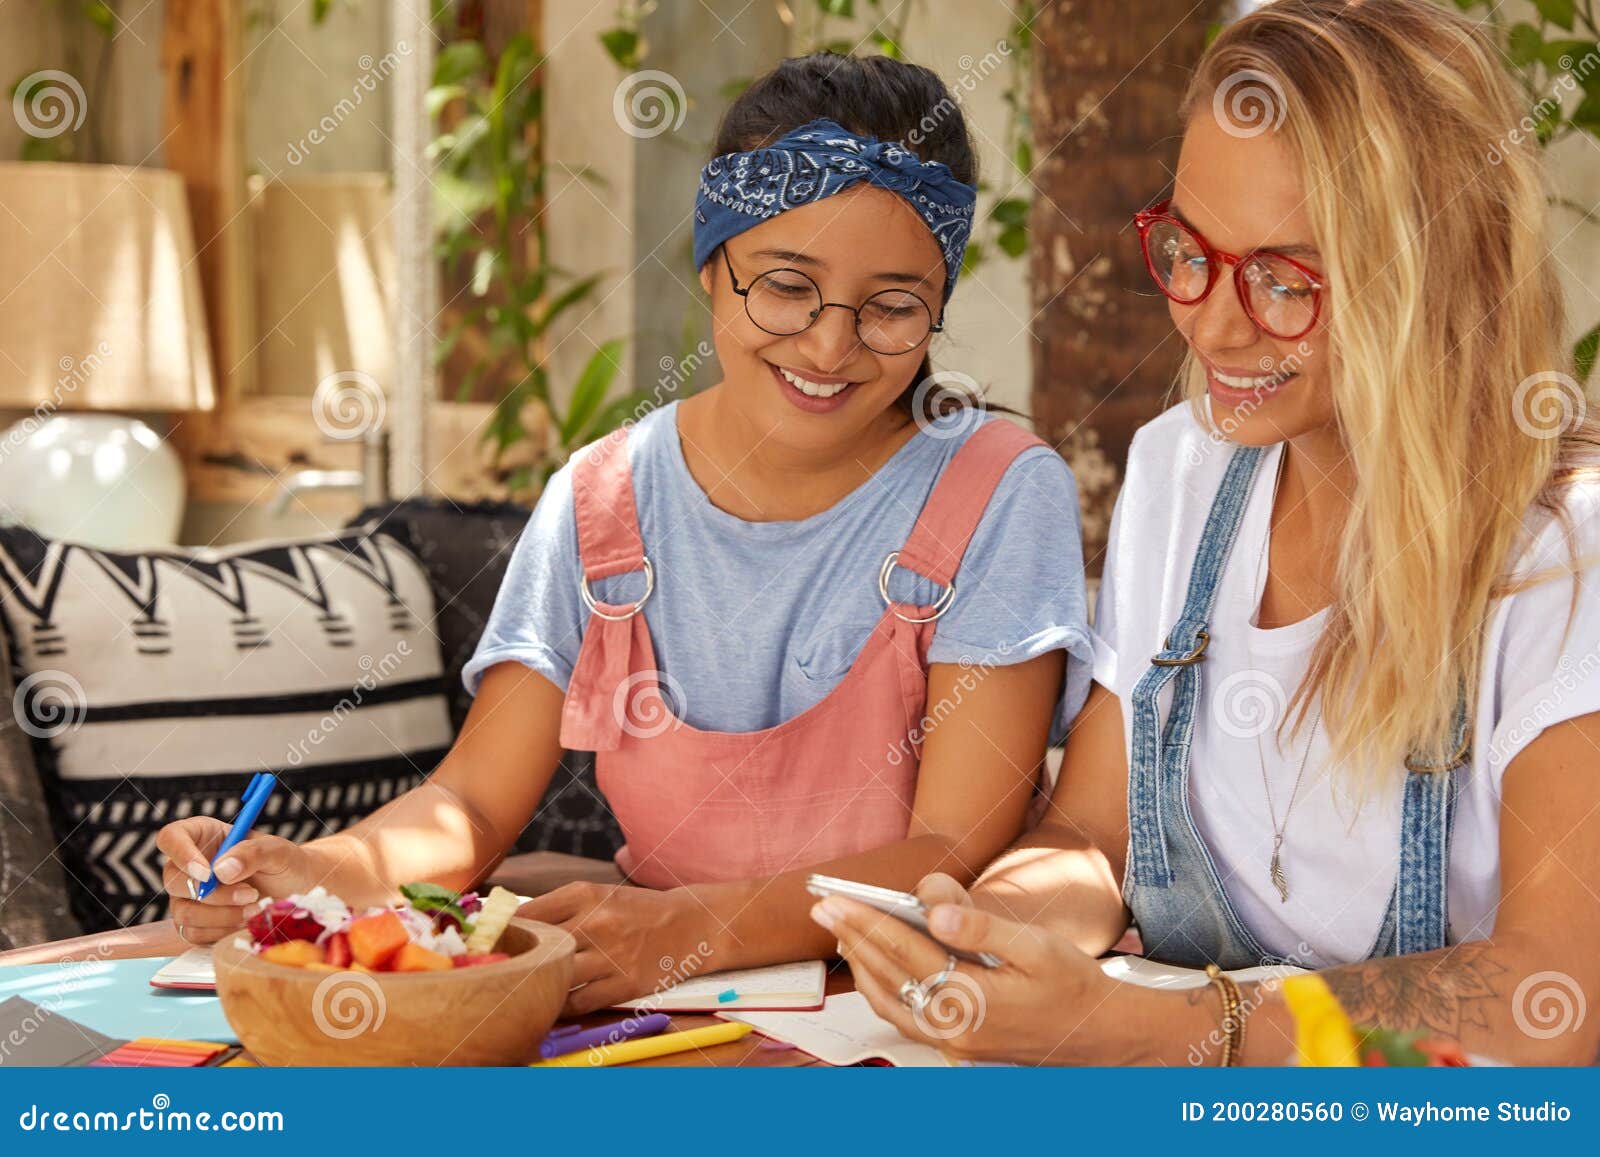 photo of multiethnic girls sit together at cozy interior, use cellulars for reading news and messaging, hold pen, eat